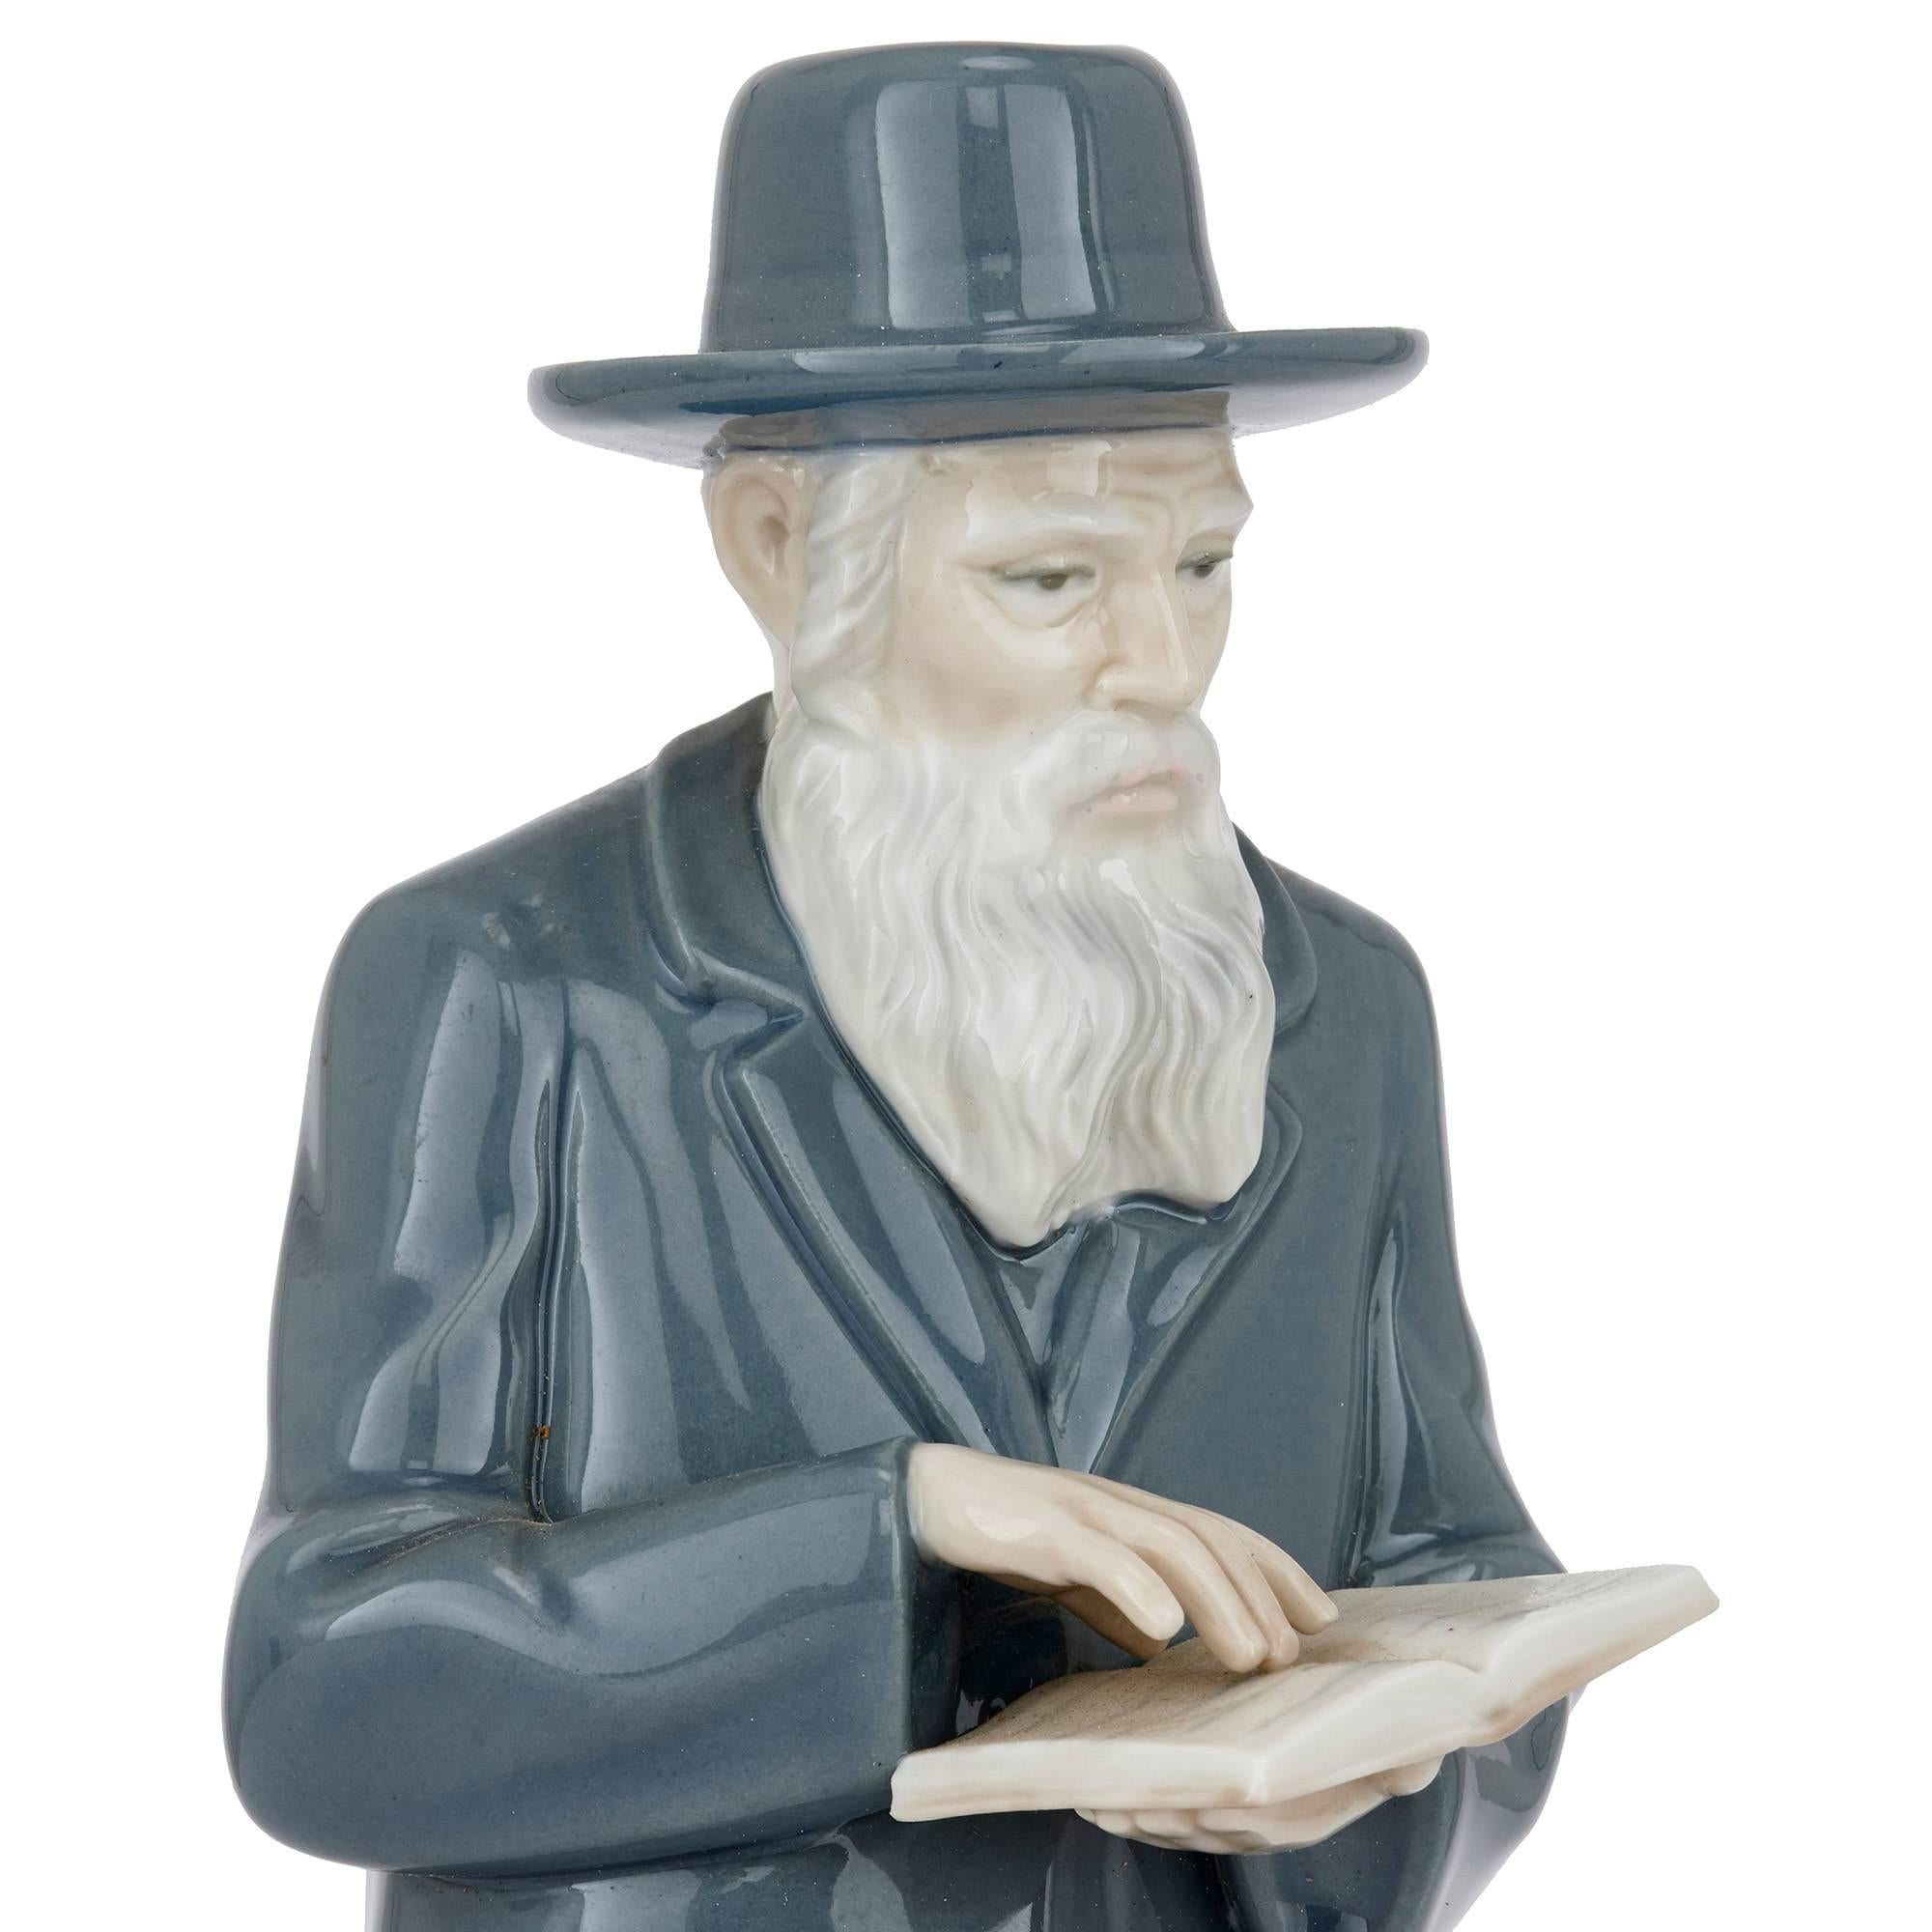 Antique Judaica Porcelain Sculpture of a Rabbi In Excellent Condition For Sale In London, GB